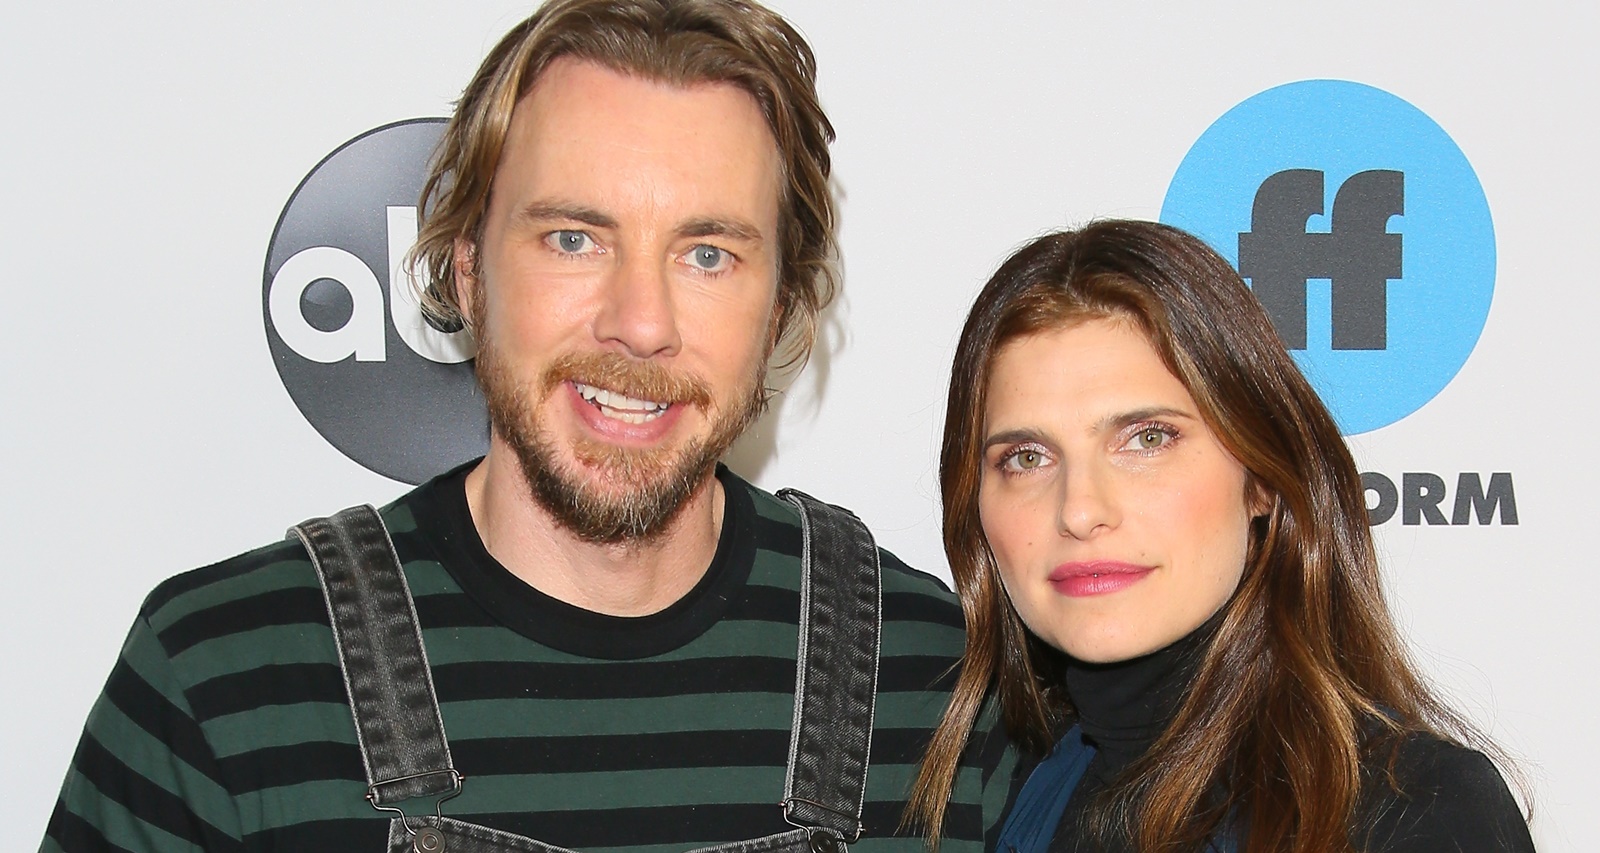 Are Lake Bell and Kristen Bell Sisters?